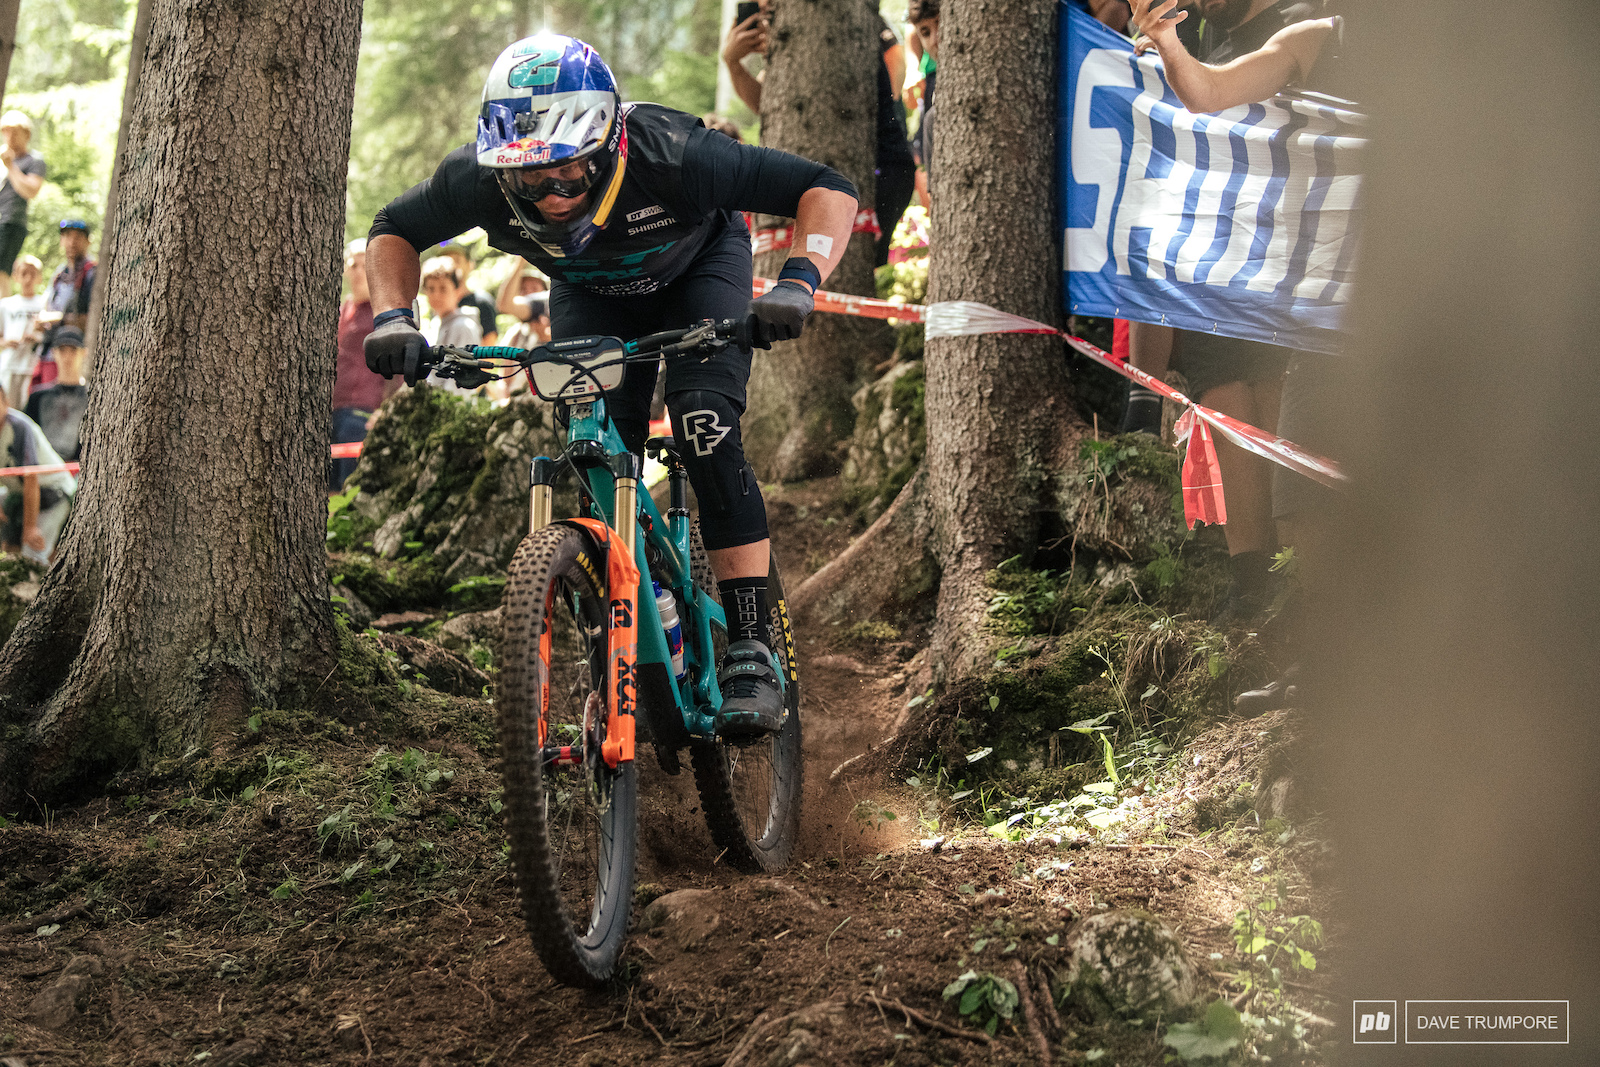 Richie came out swinging with a win in the Pro Stage on Saturday.